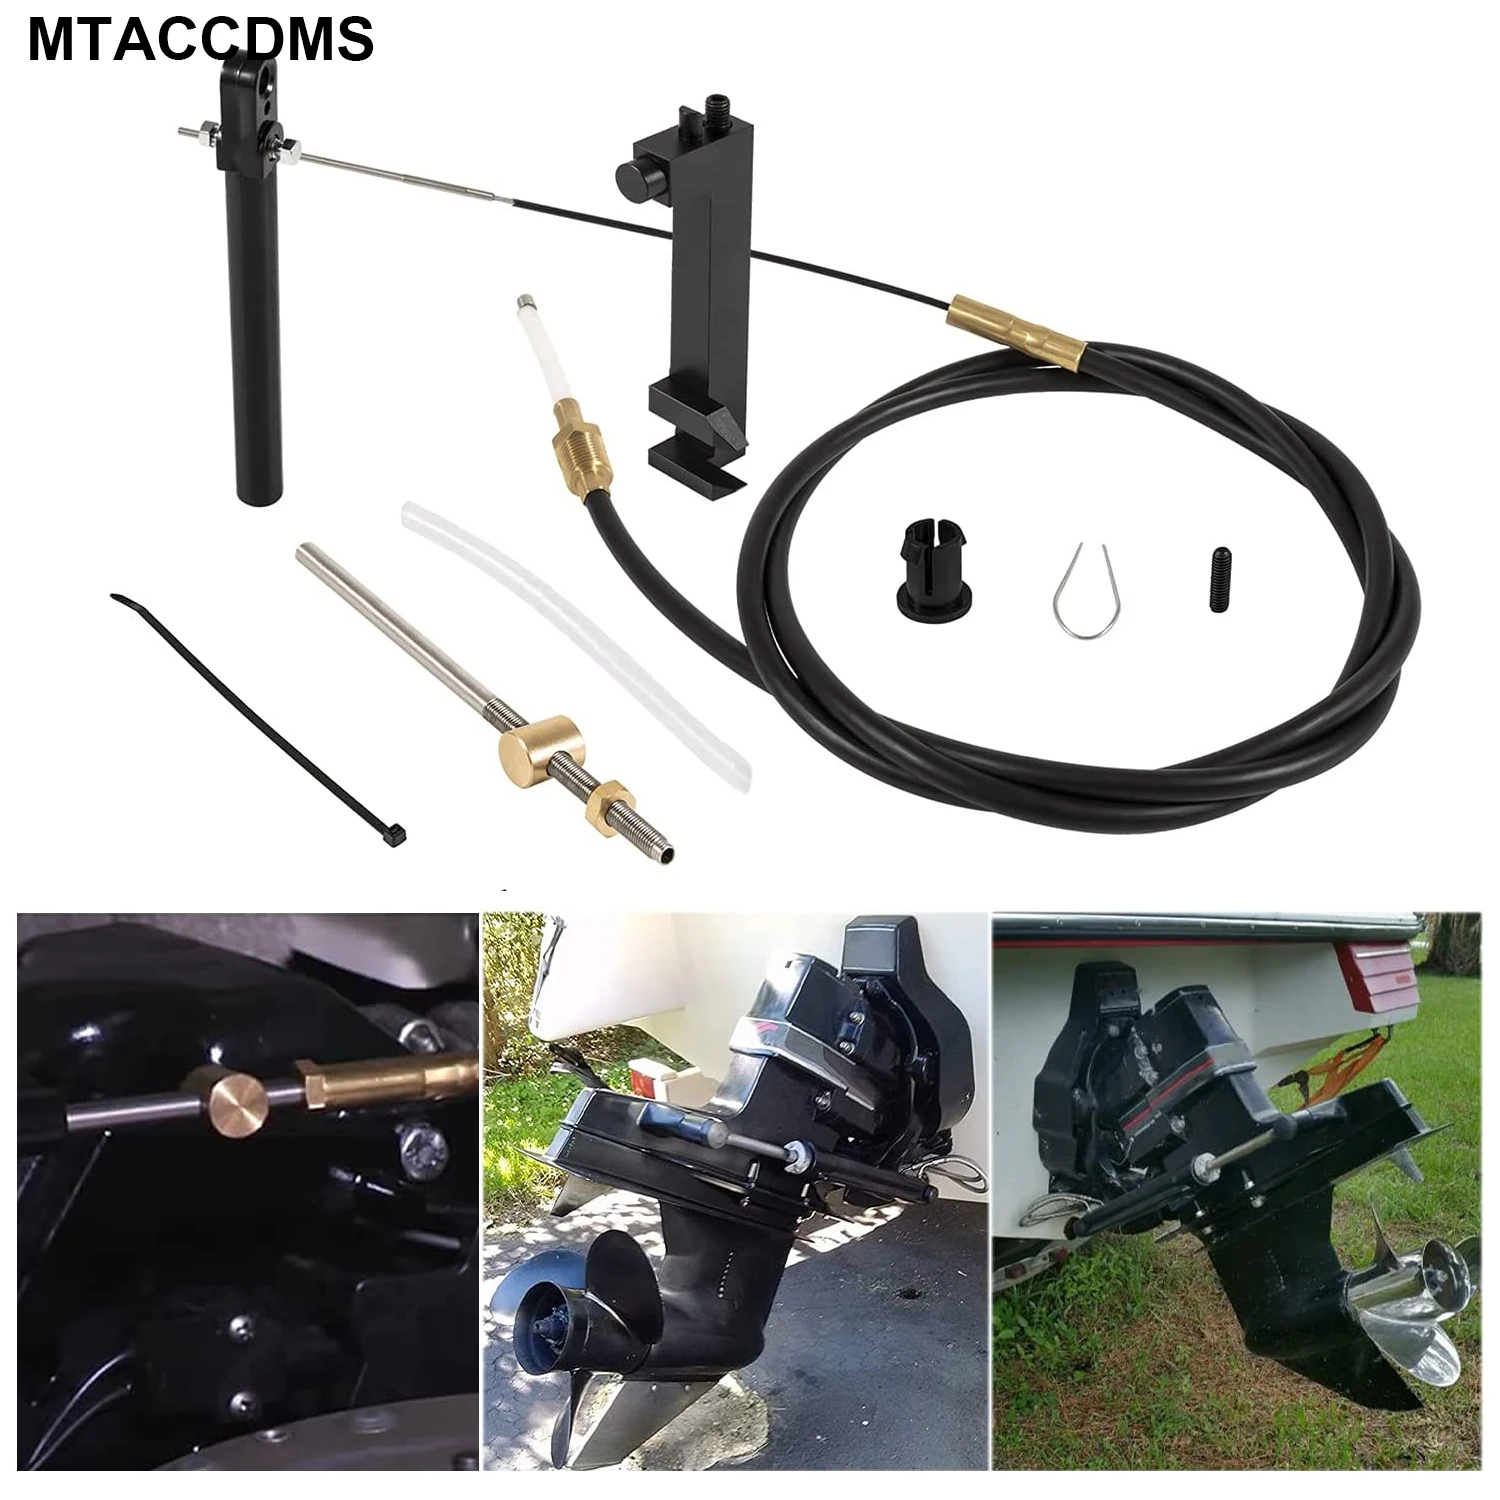 Lower Shift Cable Kit 865436A02 for MerCruiser Alpha Gen One & Two 1 2 MR MC (9 Pcs/Set)